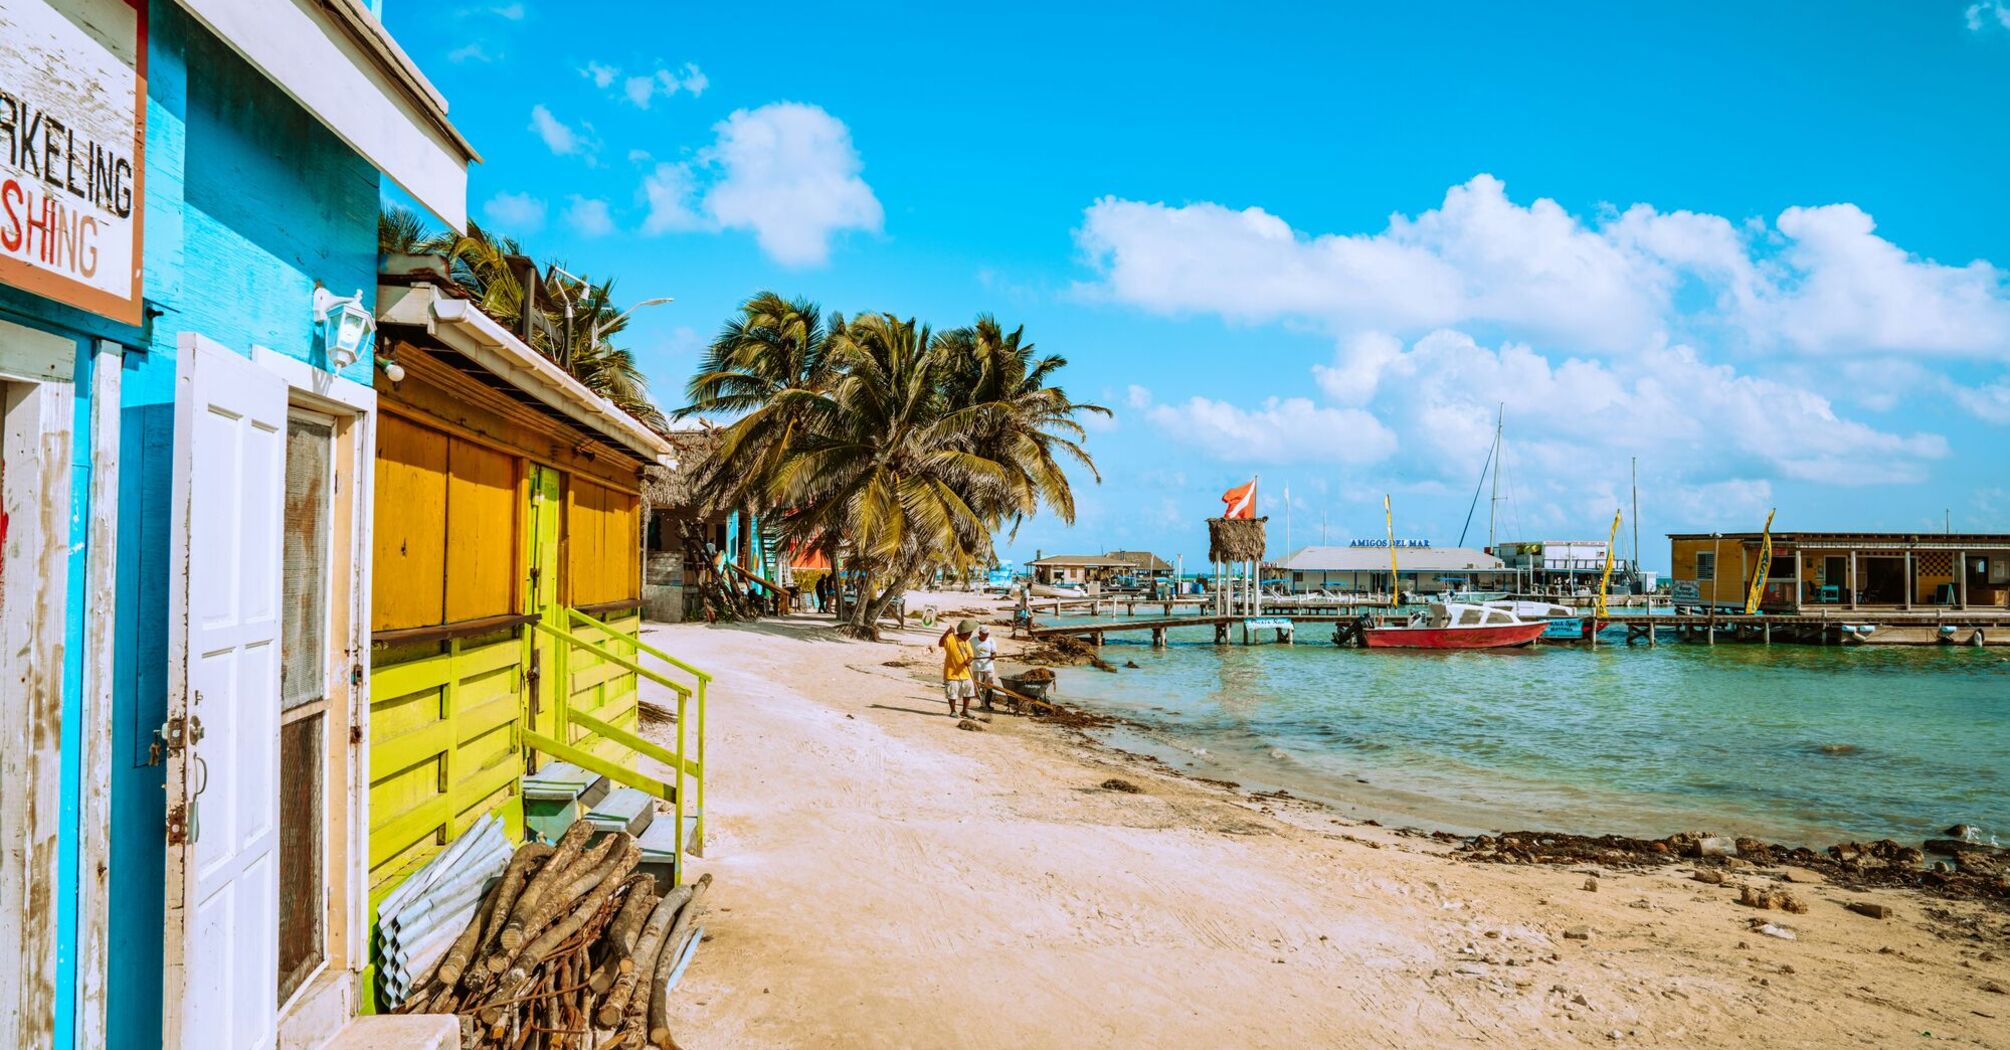 Colorful beachfront buildings in Belize, palm trees, boats docked at piers, and visitors walking on a sandy beach